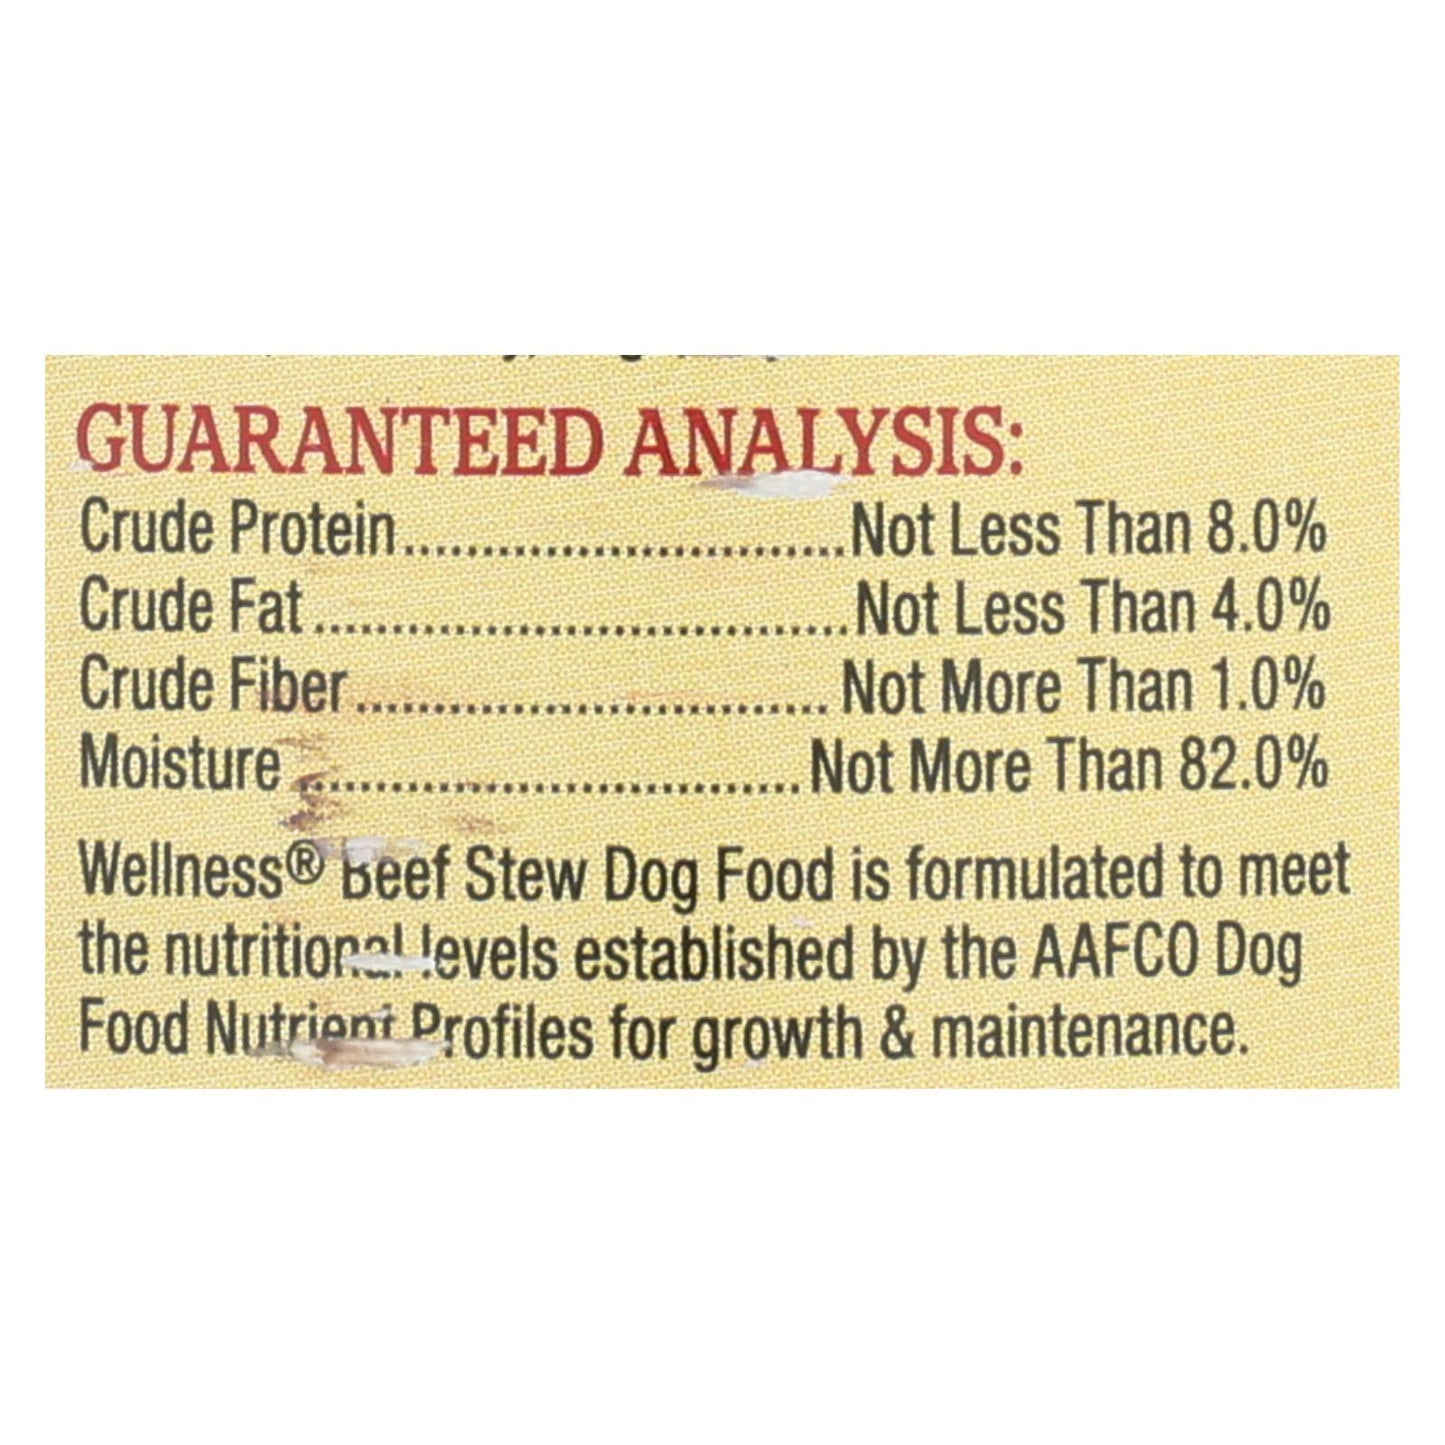 Wellness Wet Dog Food- Beef with Carrot and Potatoes - Case of 12